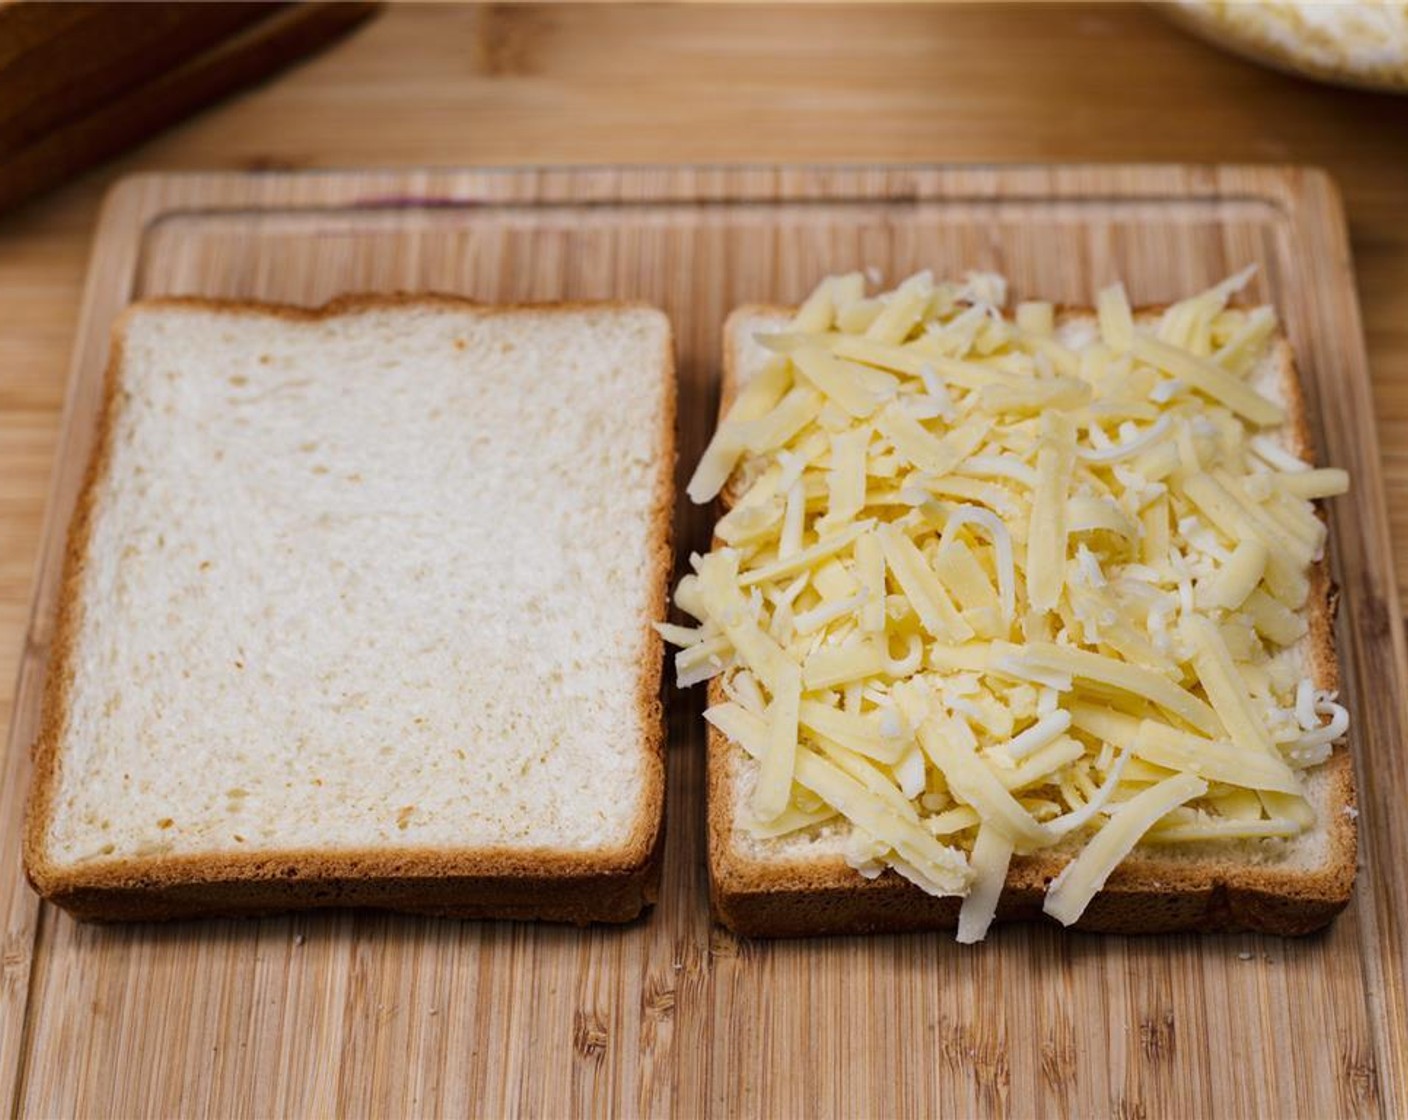 step 5 Sprinkle the other unbuttered side of the bread with Shredded White Cheddar Cheese (2 cups).